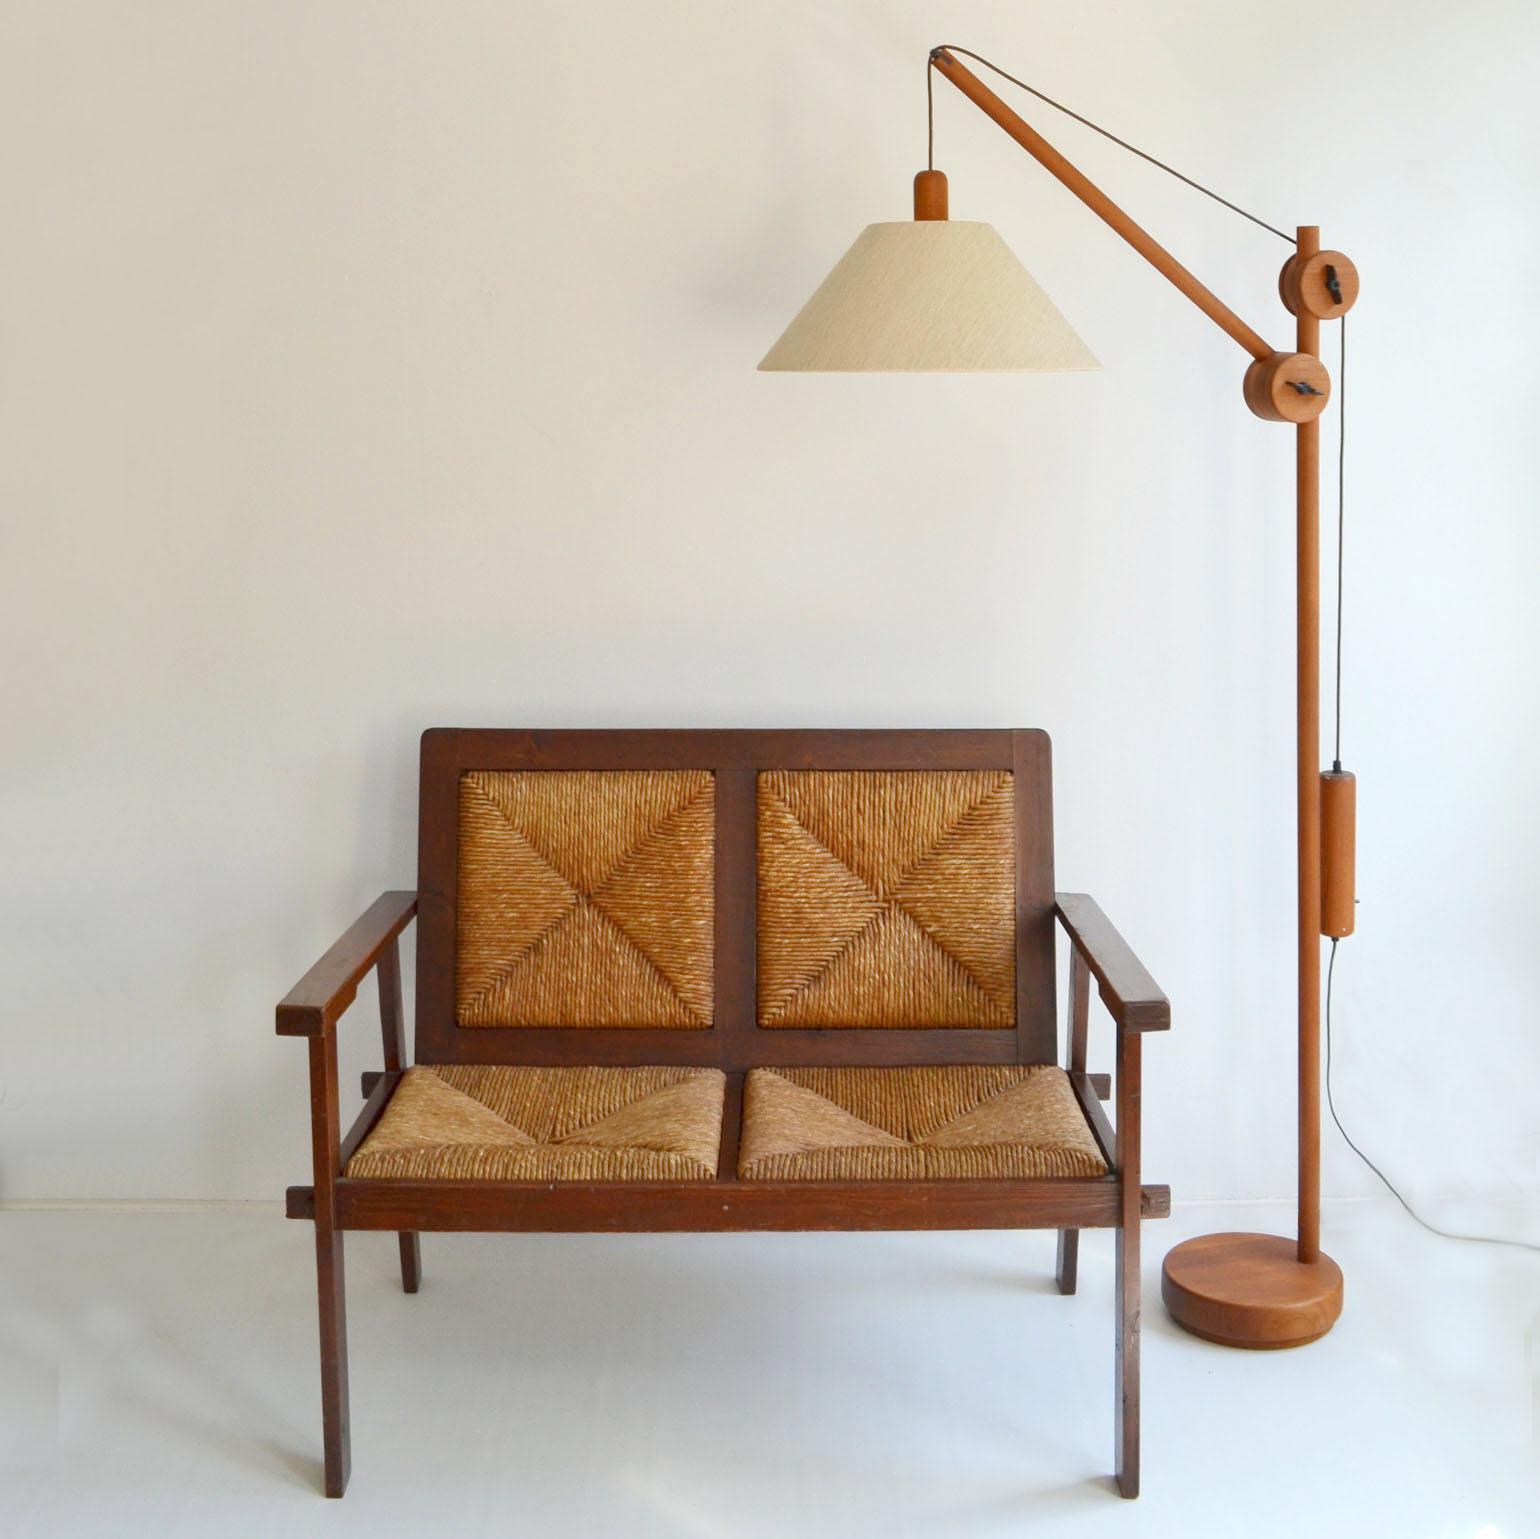 Unique Danish Mid-Century Modern floor lamp, produced around the early 1970's. The teak frame has an adjustable arm and counterbalance weight for positioning of the light source. The lamp and counterweight move in opposite directions (both away from